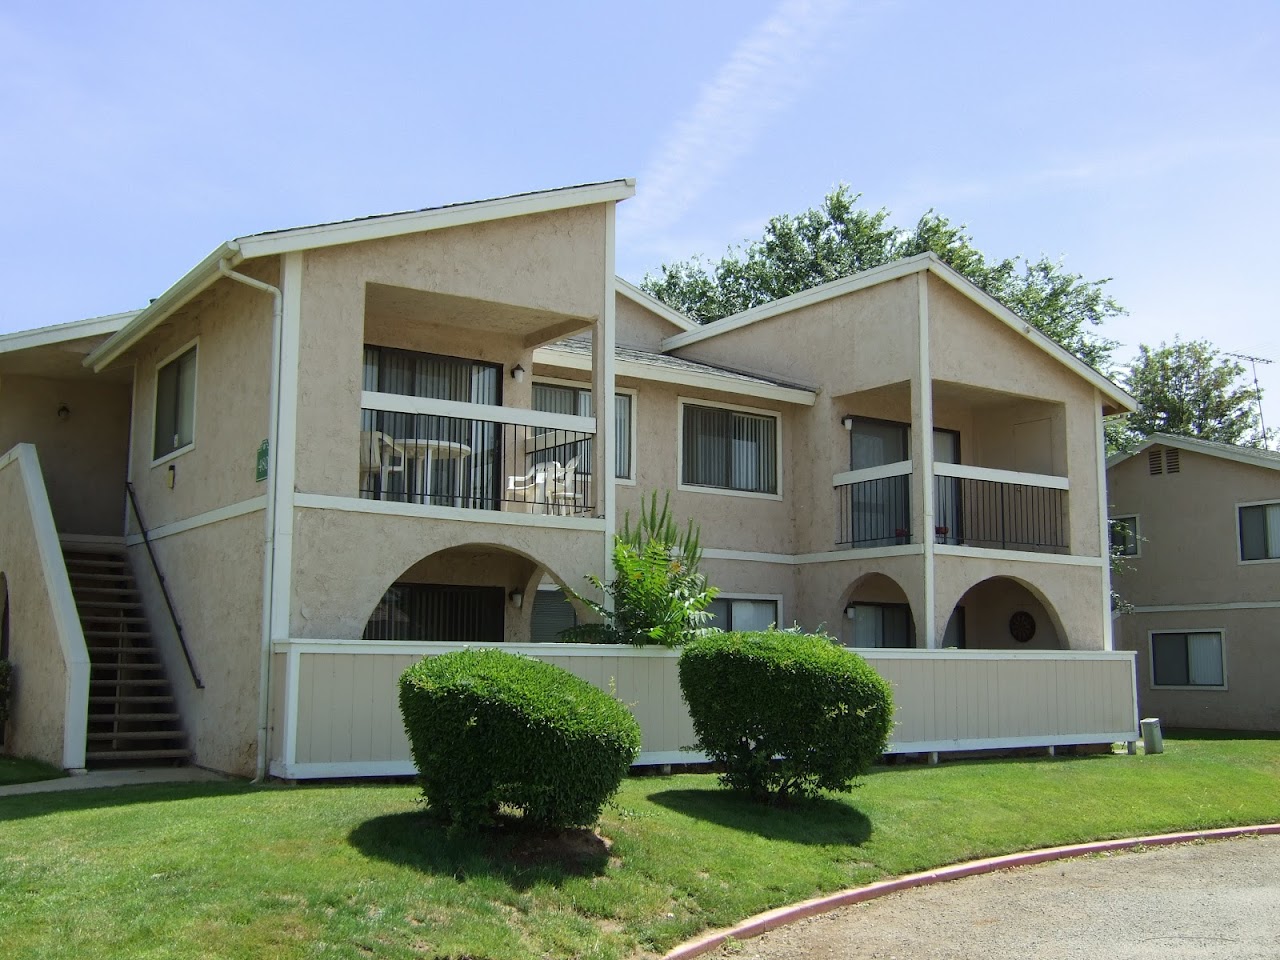 Photo of MOUNTAIN VIEW APTS at 488 E 15TH ST BEAUMONT, CA 92223